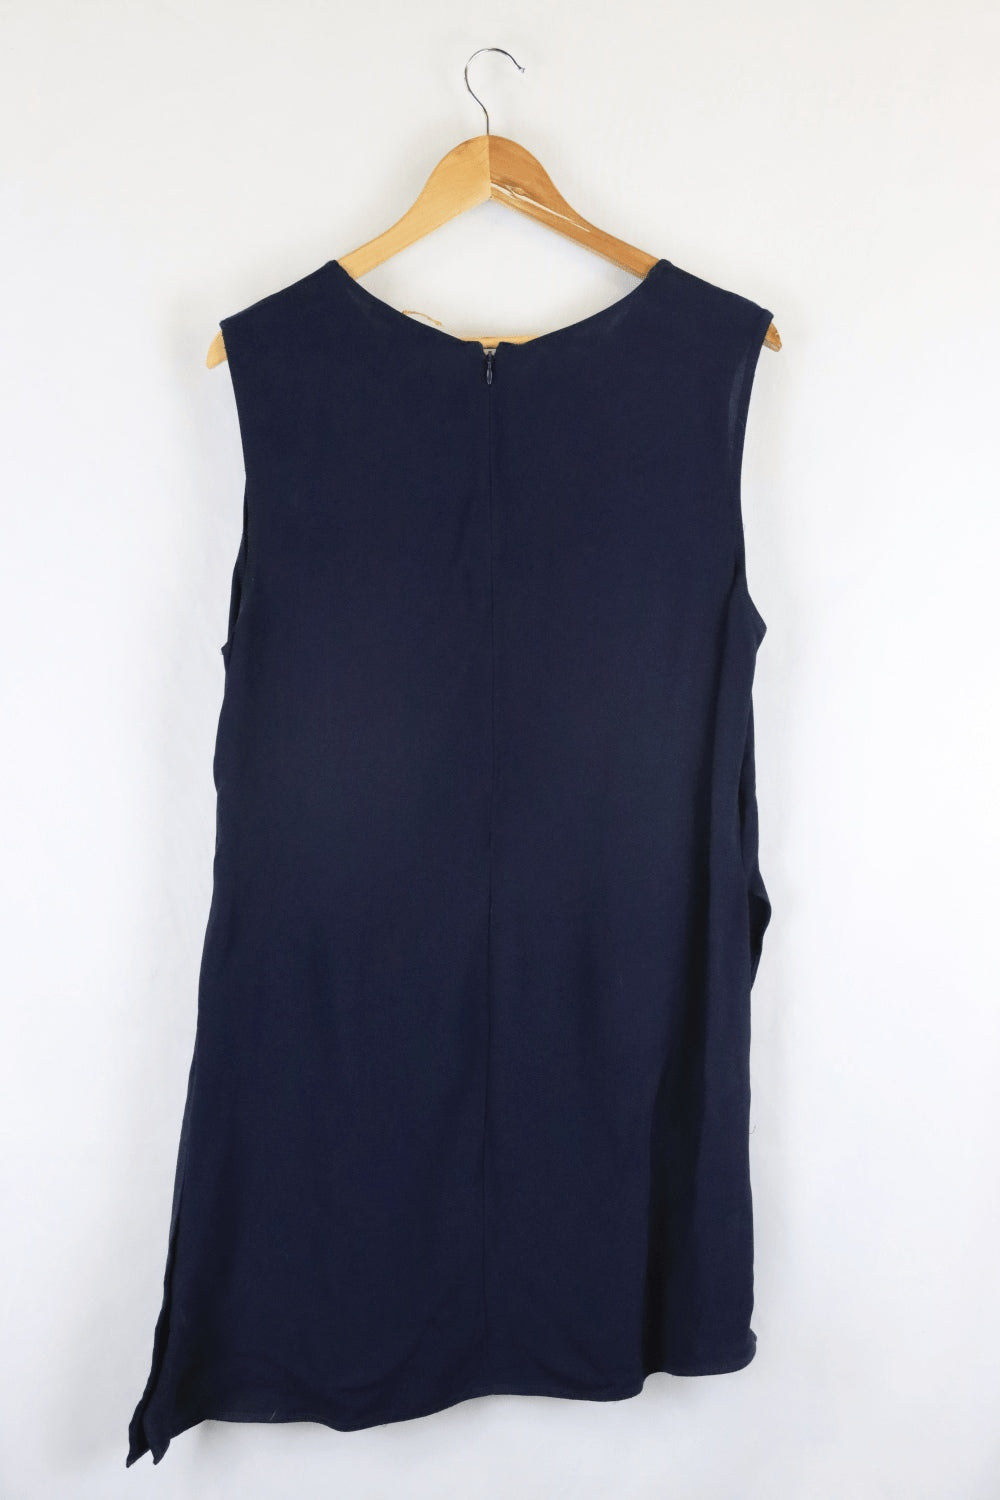 Country Road Navy Singlet XL